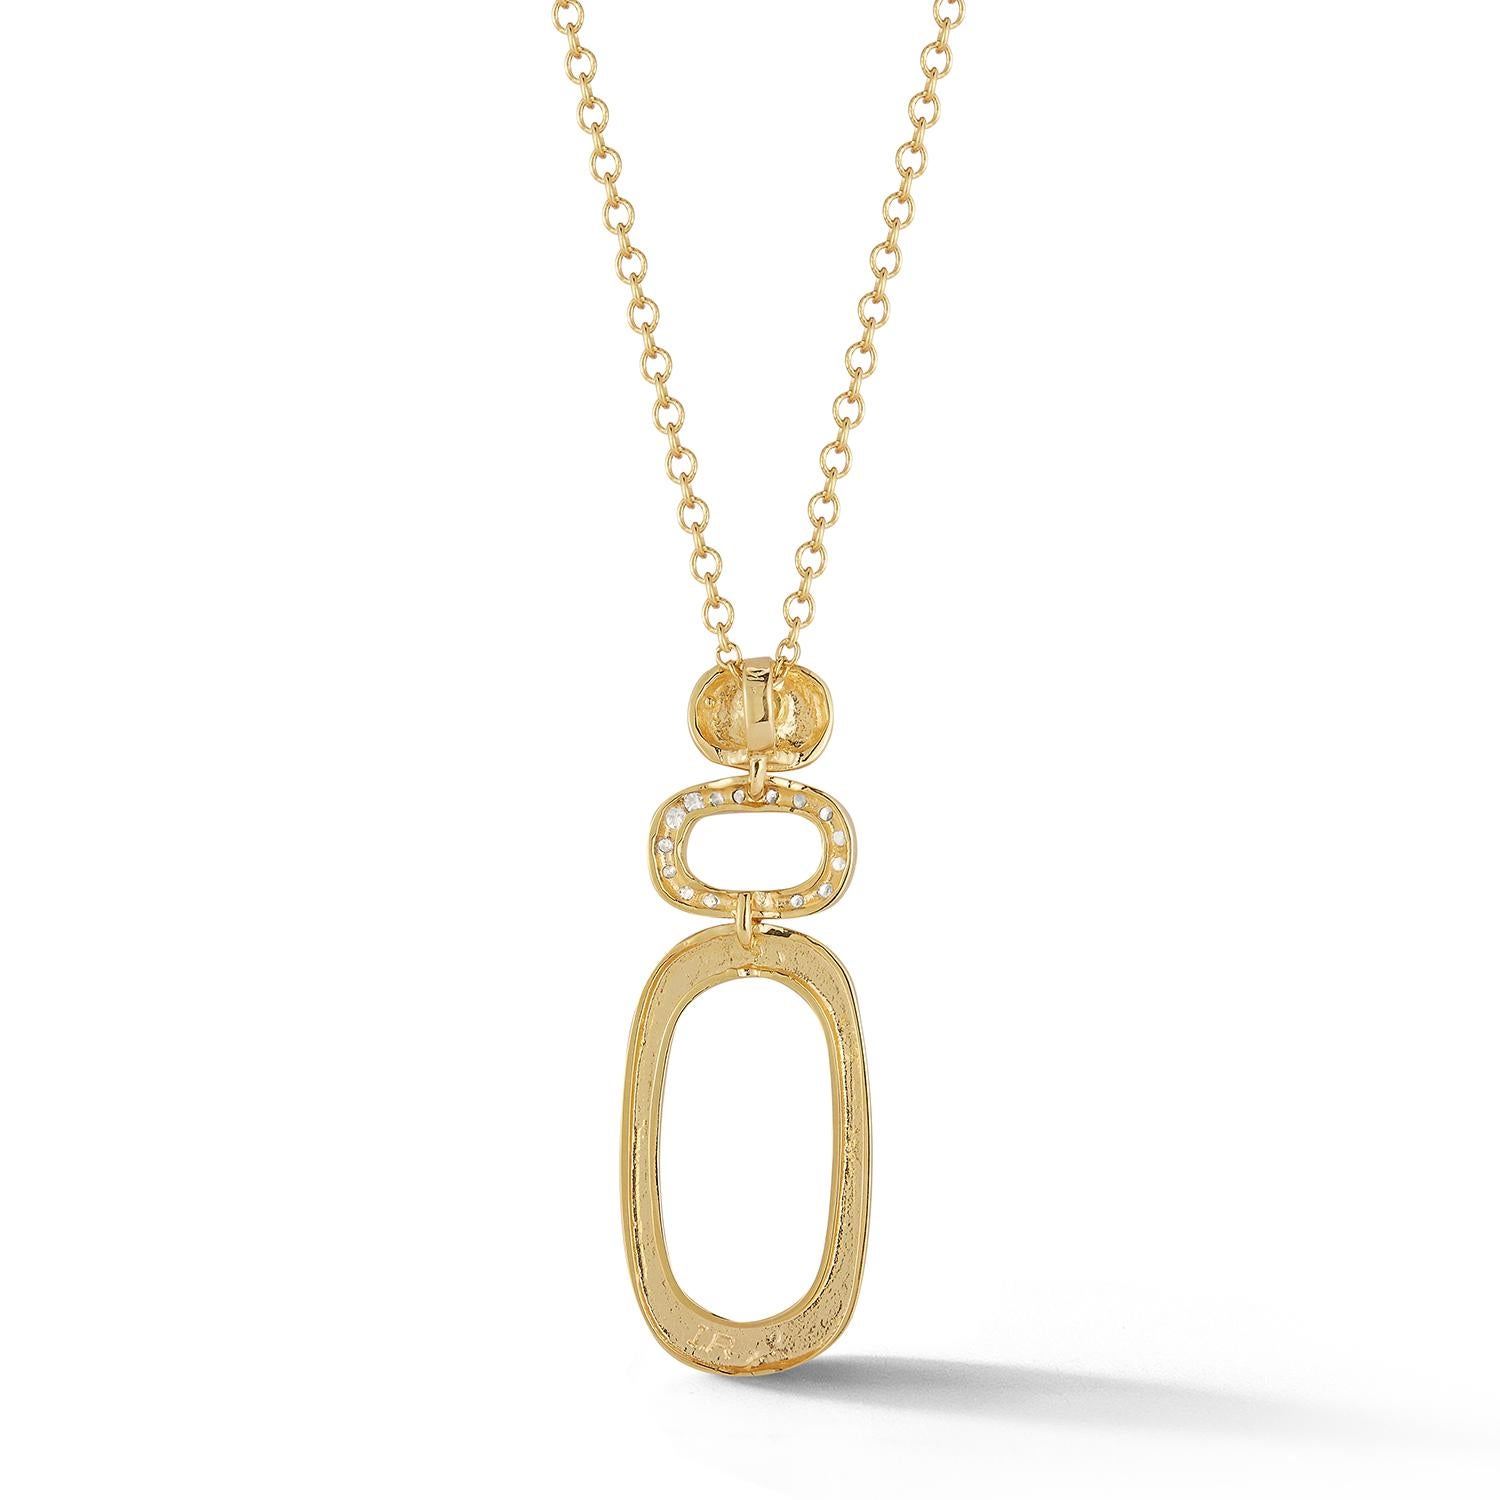 Round Cut Hand-Crafted 14k Yellow Gold High Polish Geometric Pendant For Sale